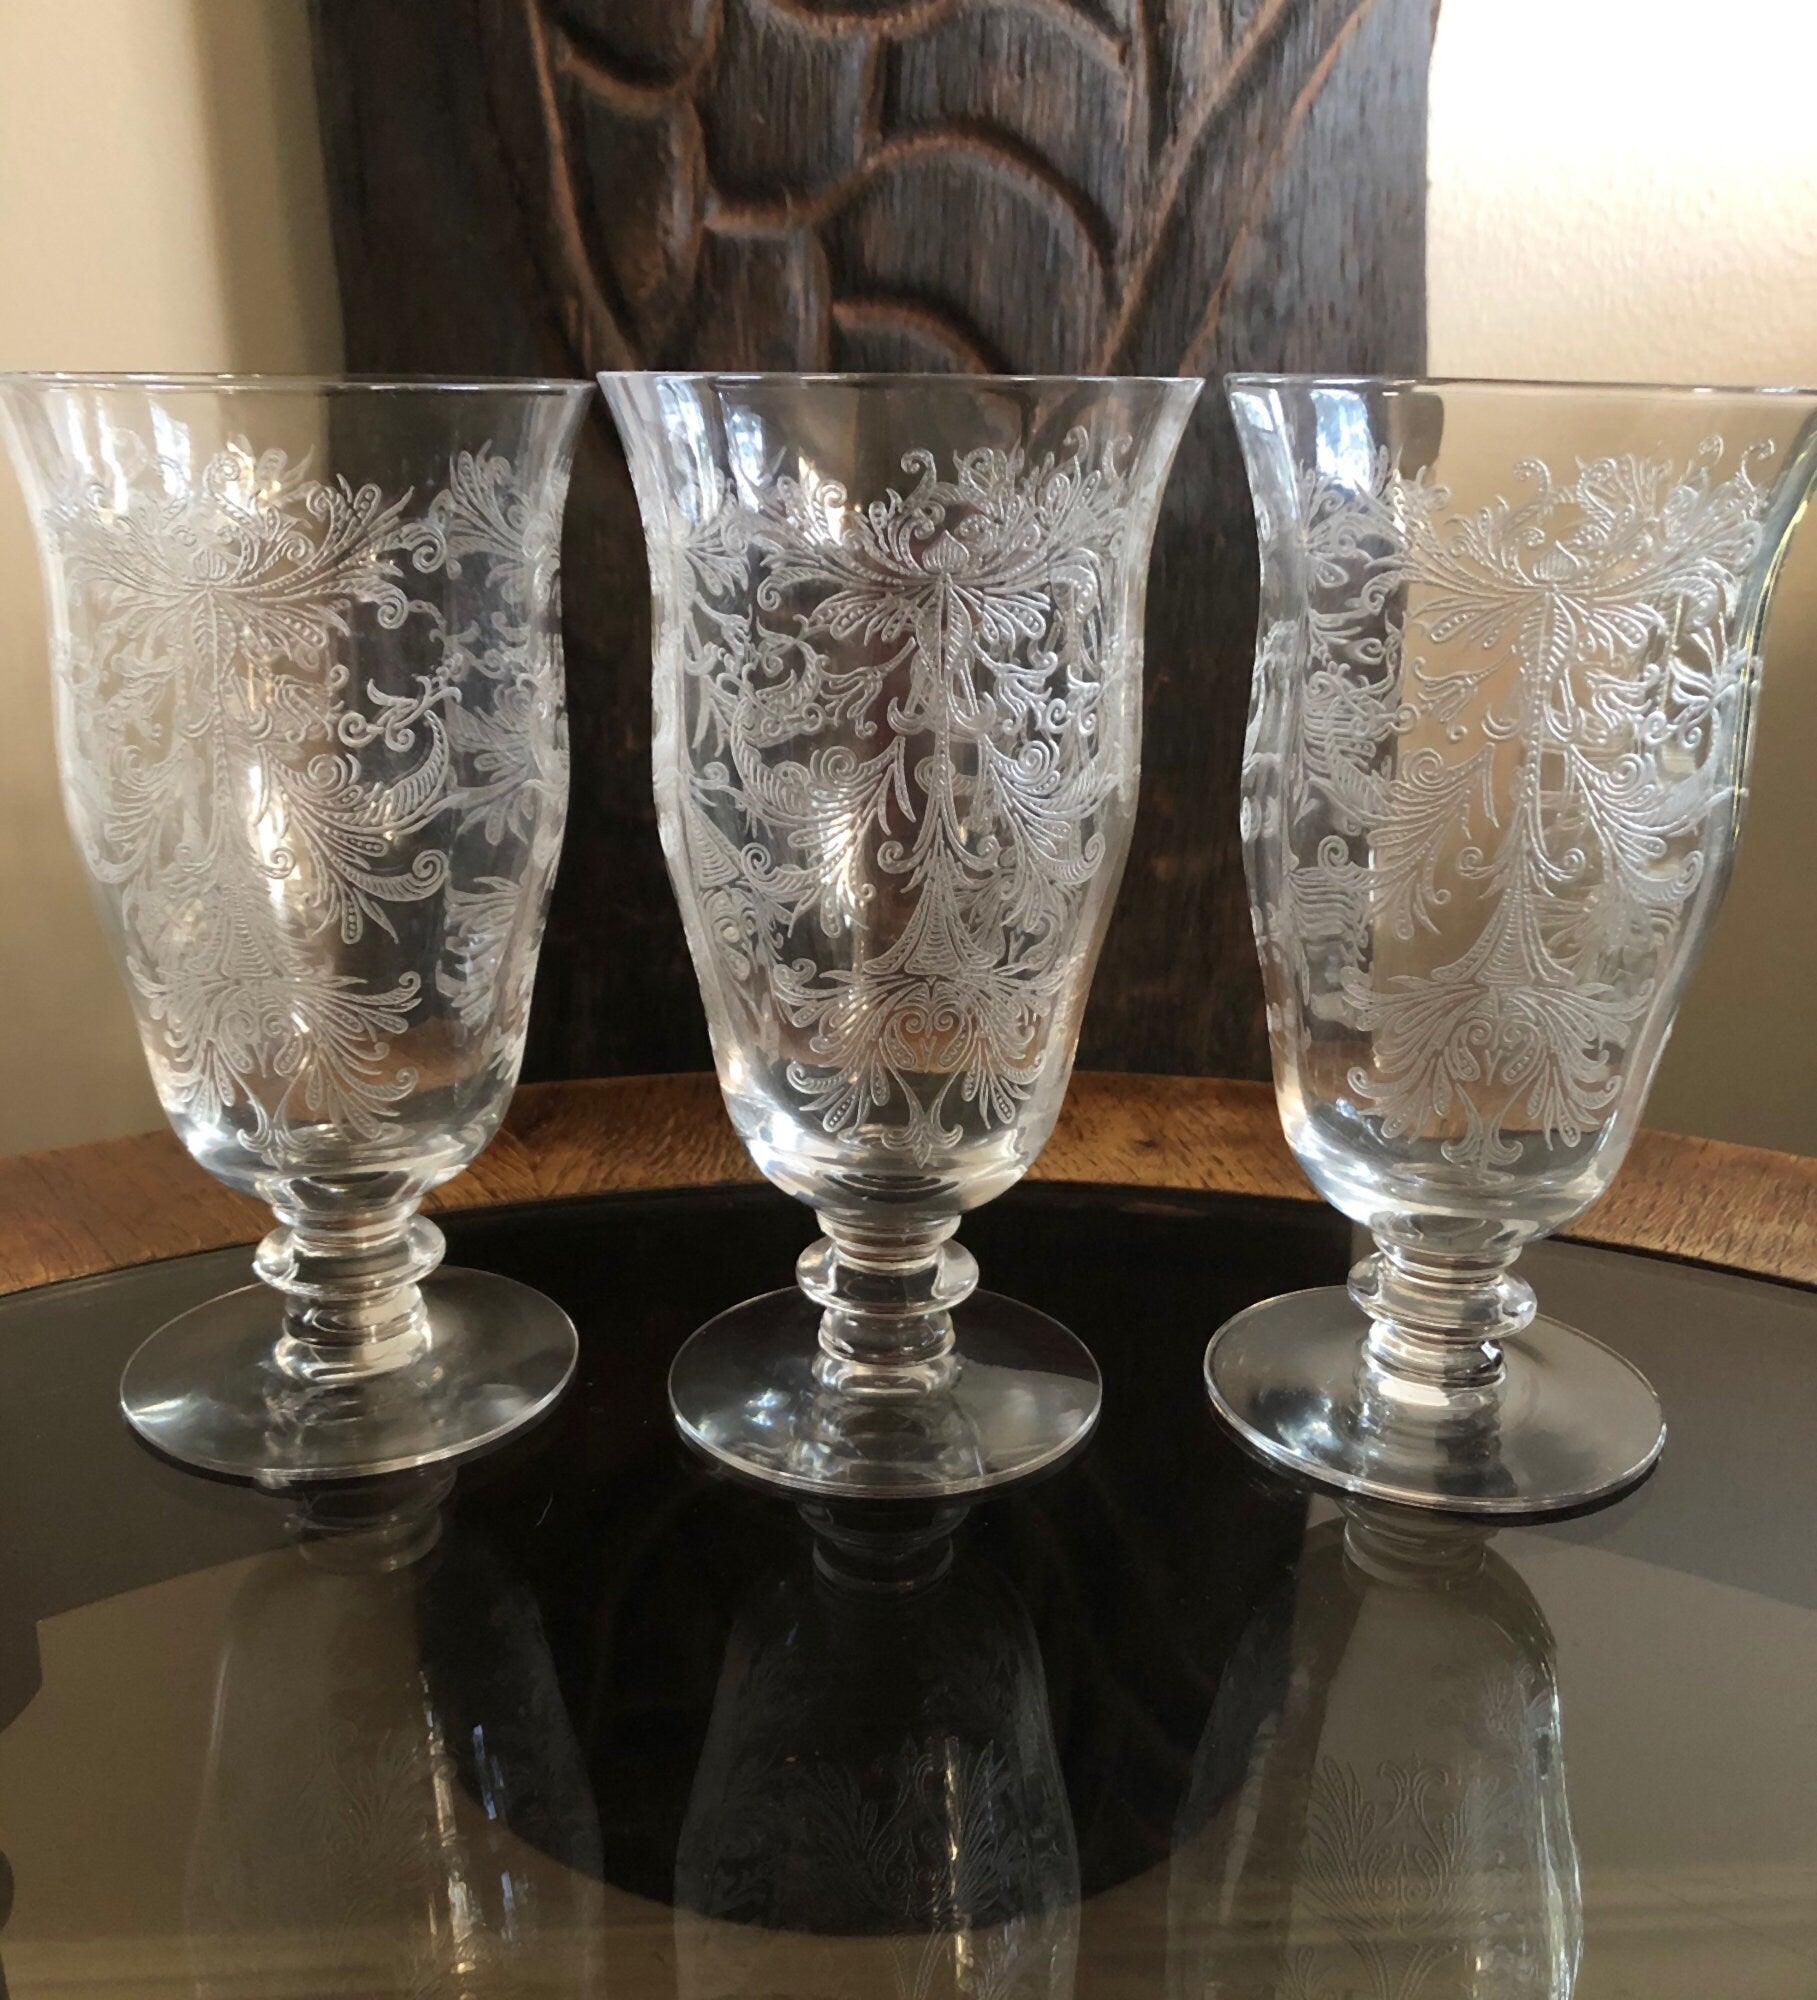 Juice / Water Glasses. Tiffin's Byzantine Pattern. Five Small